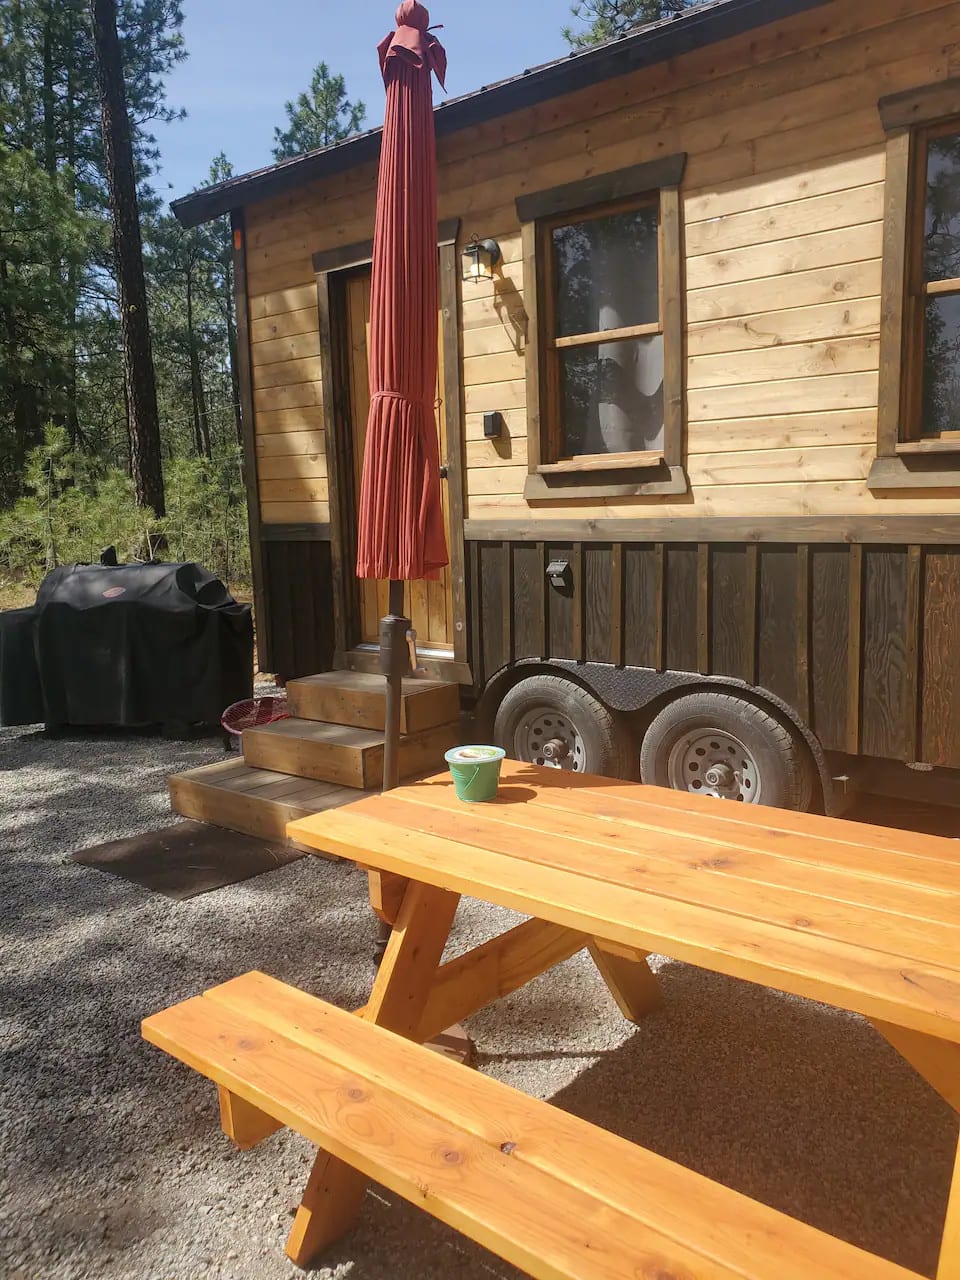 Outdoor picnic table which now has a automatic awning attached to tiny home to provide shade when not windy